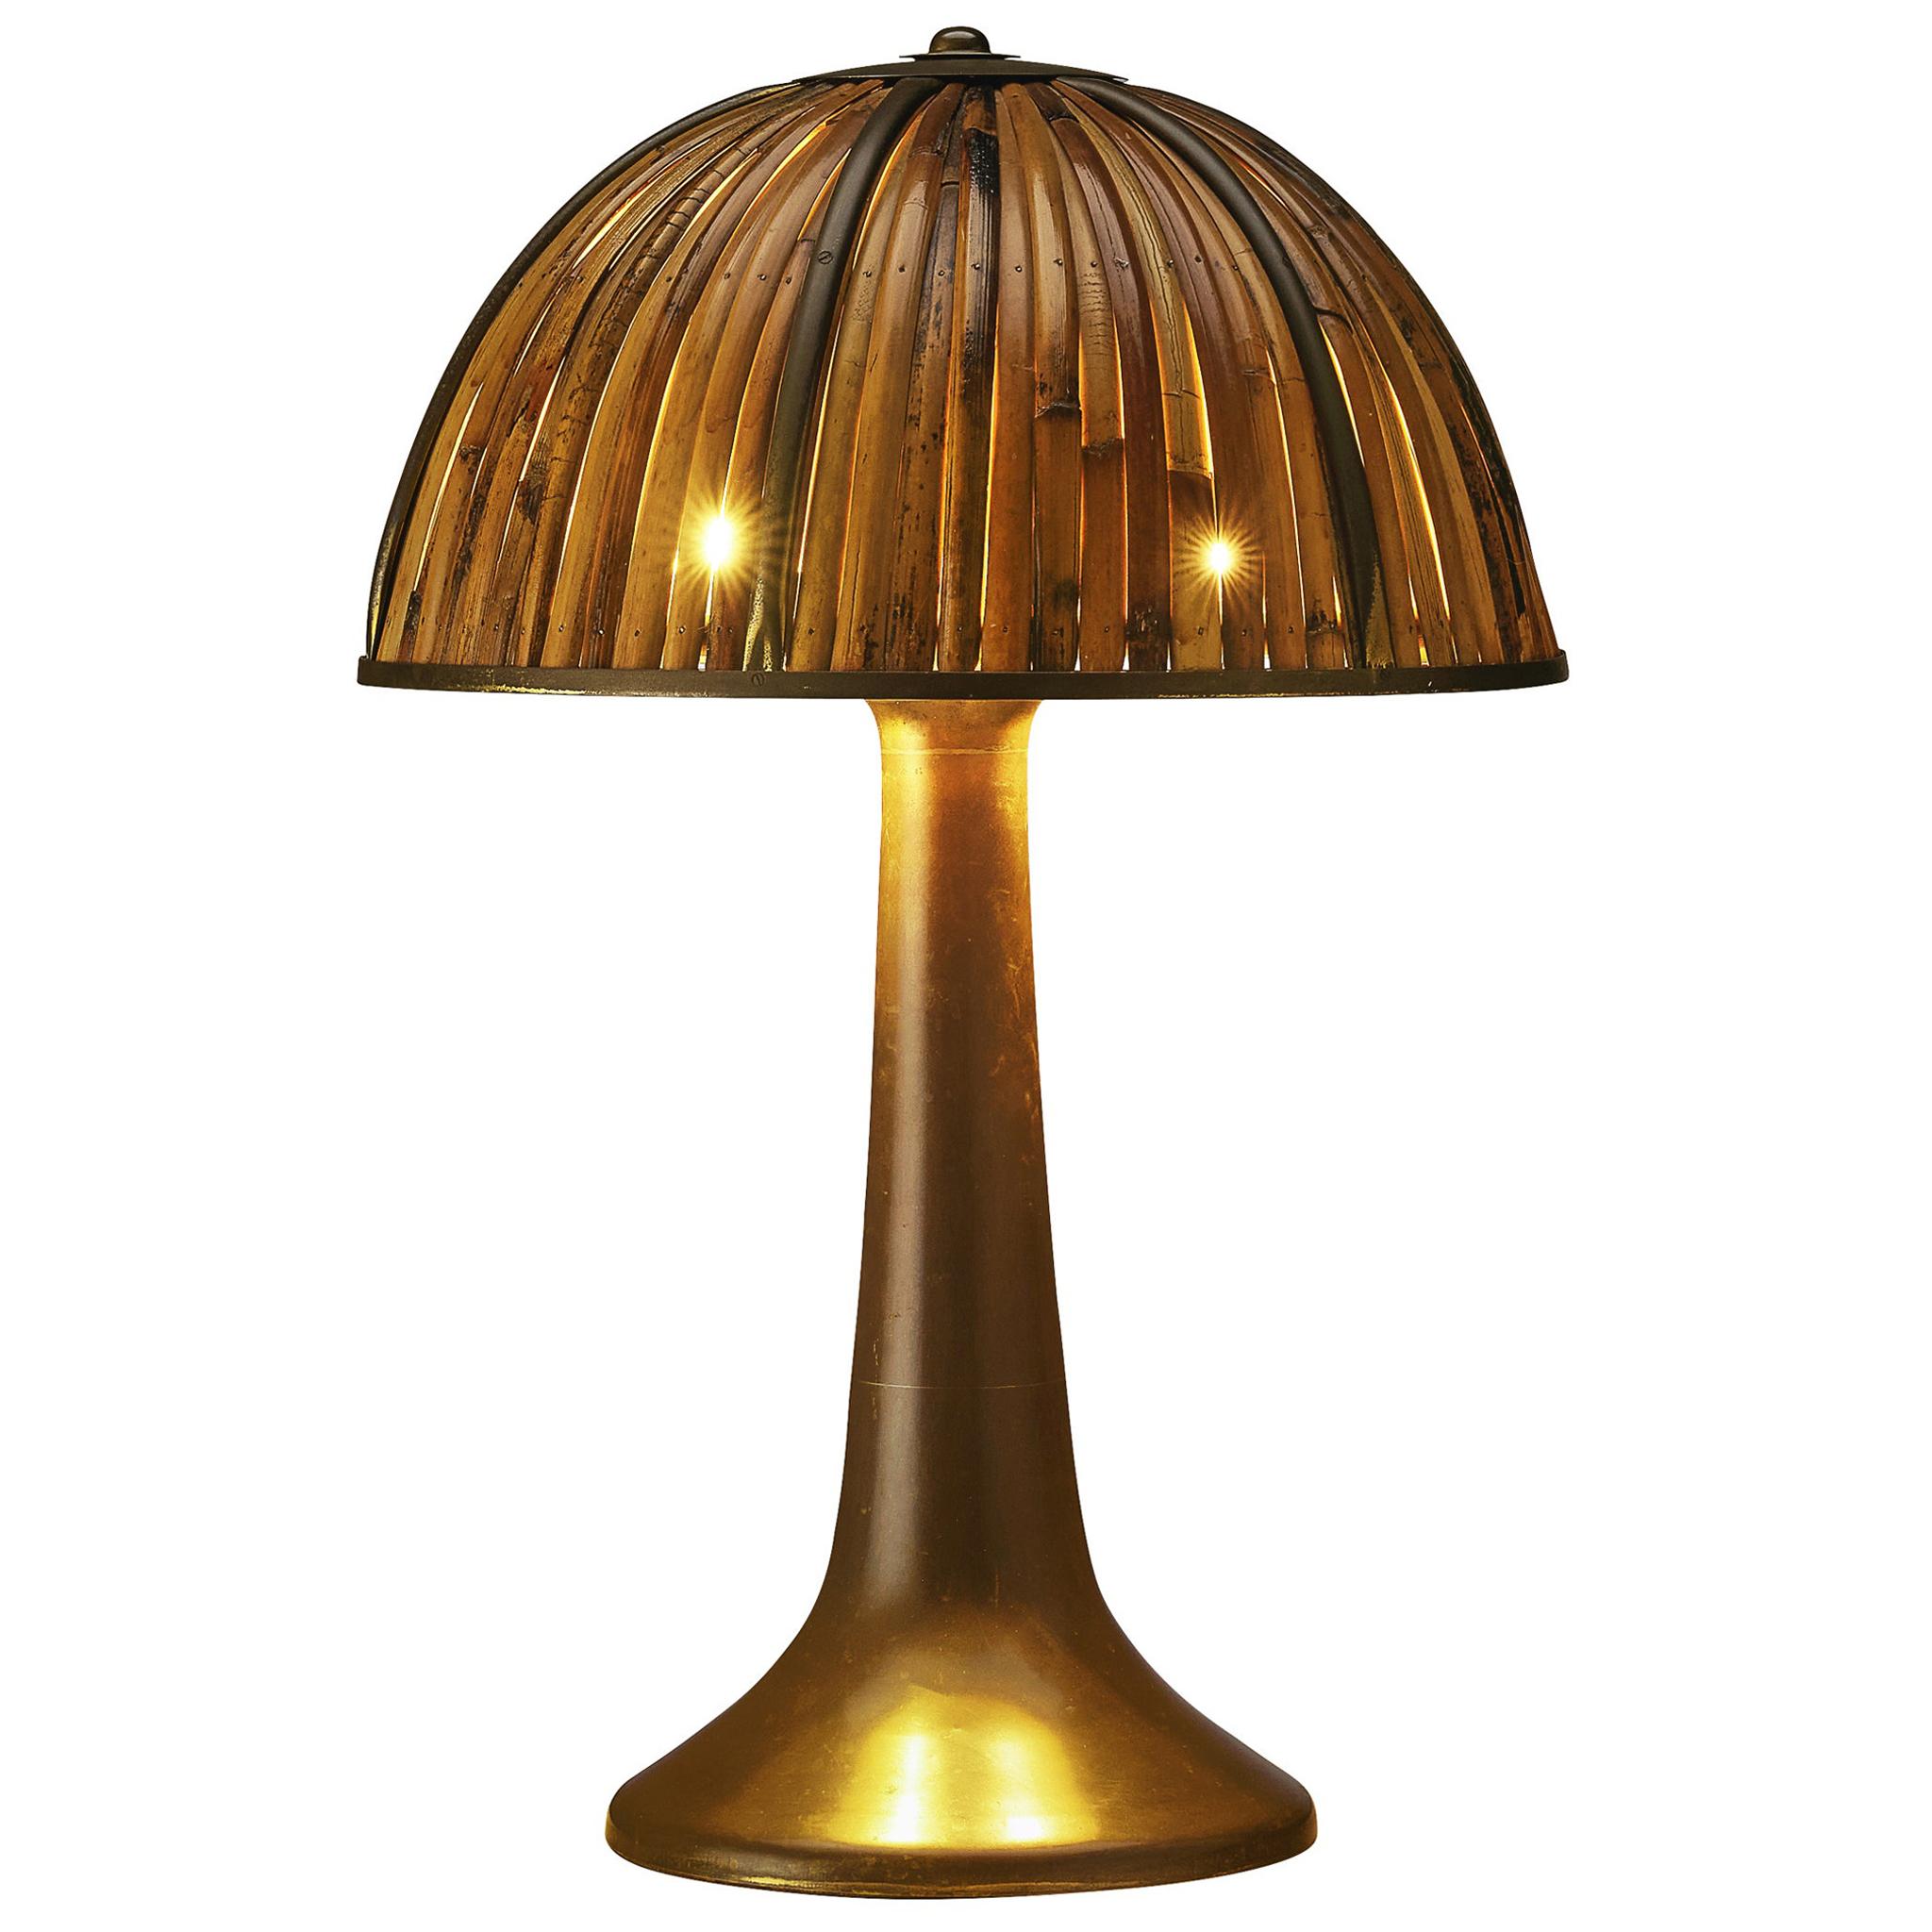 Gabriella Crespi 'Fungo' Table Lamp in Brass and Bamboo